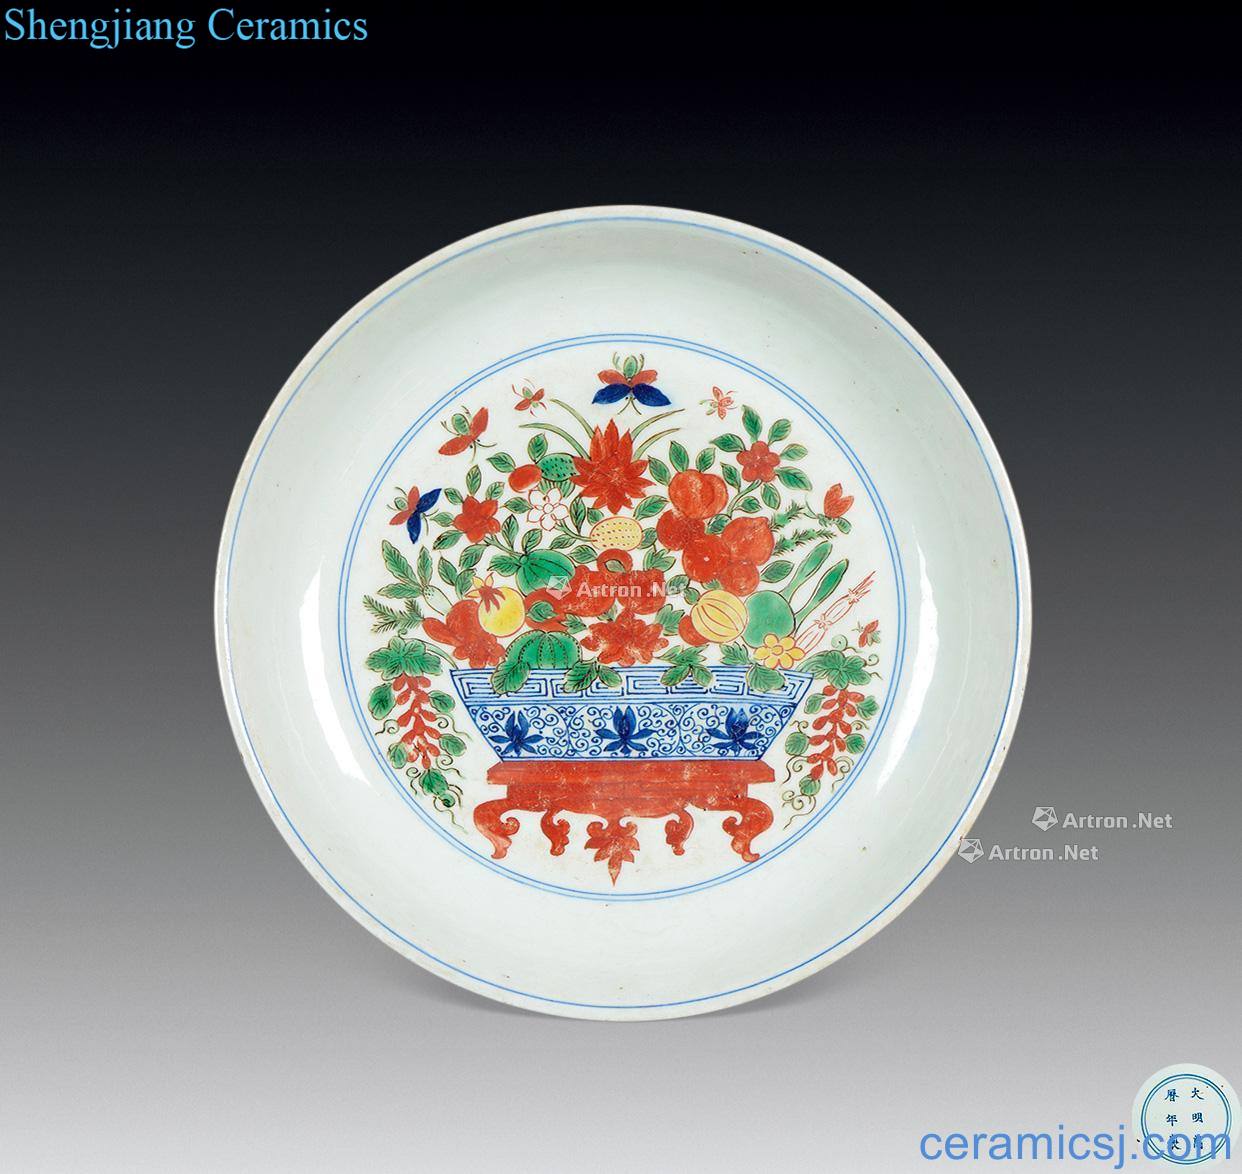 The colorful flower pattern plate